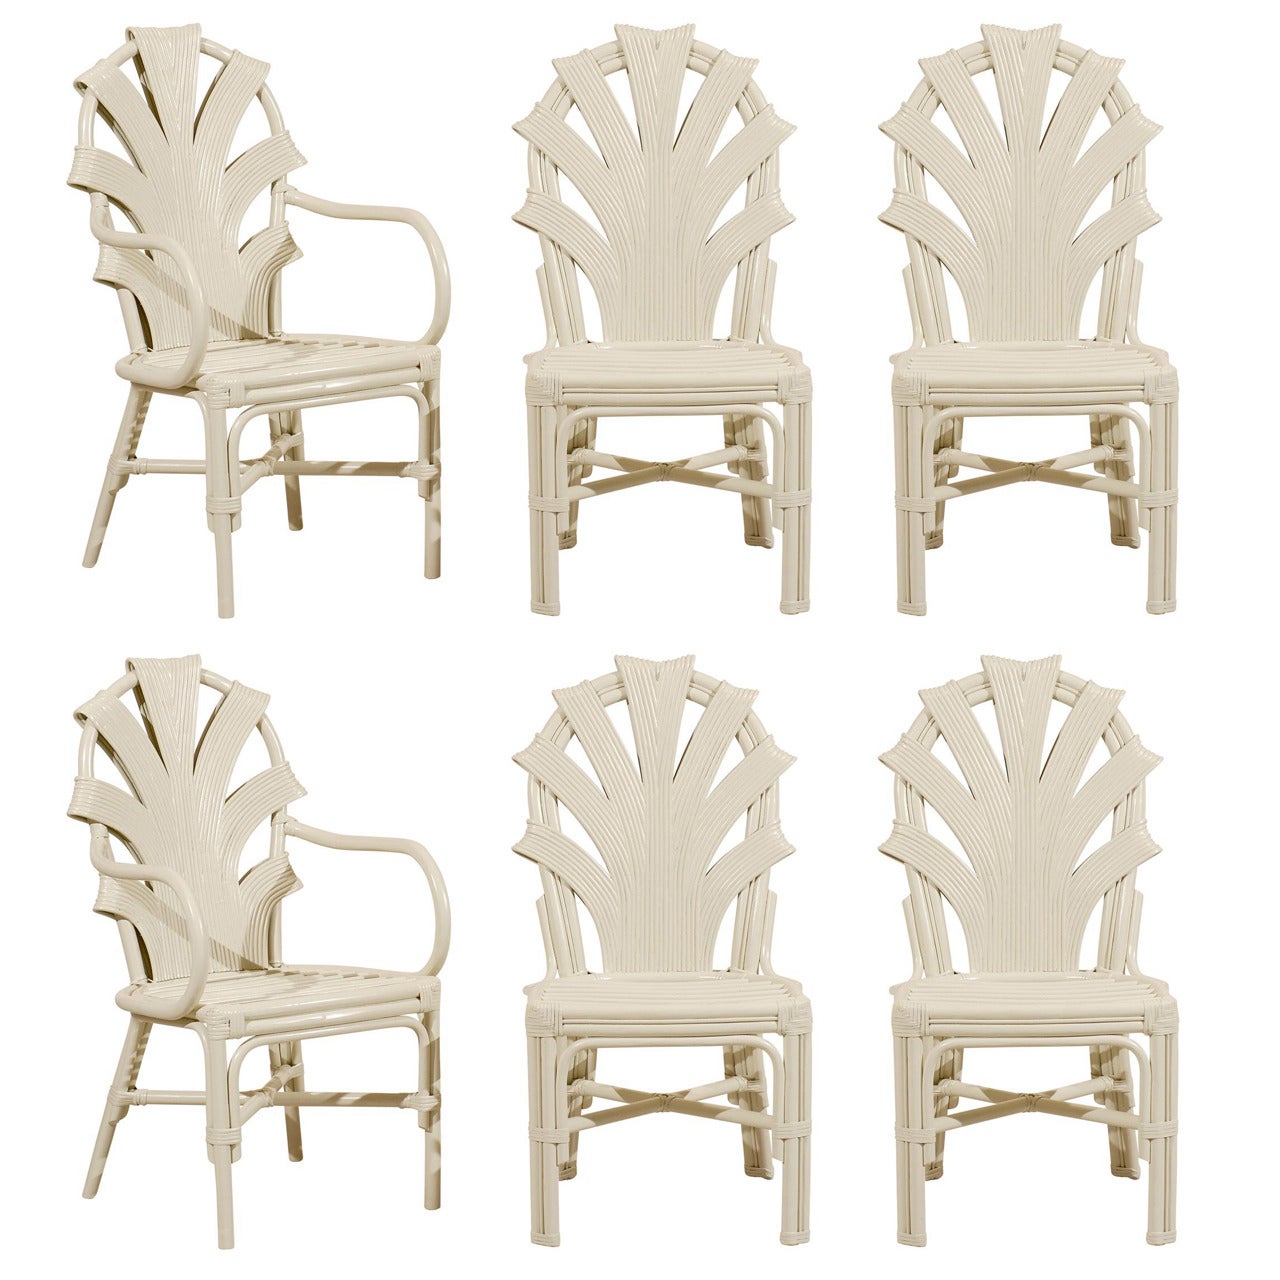 Exceptional Set of Six Vintage Rattan Dining Chairs in Cream Lacquer For Sale